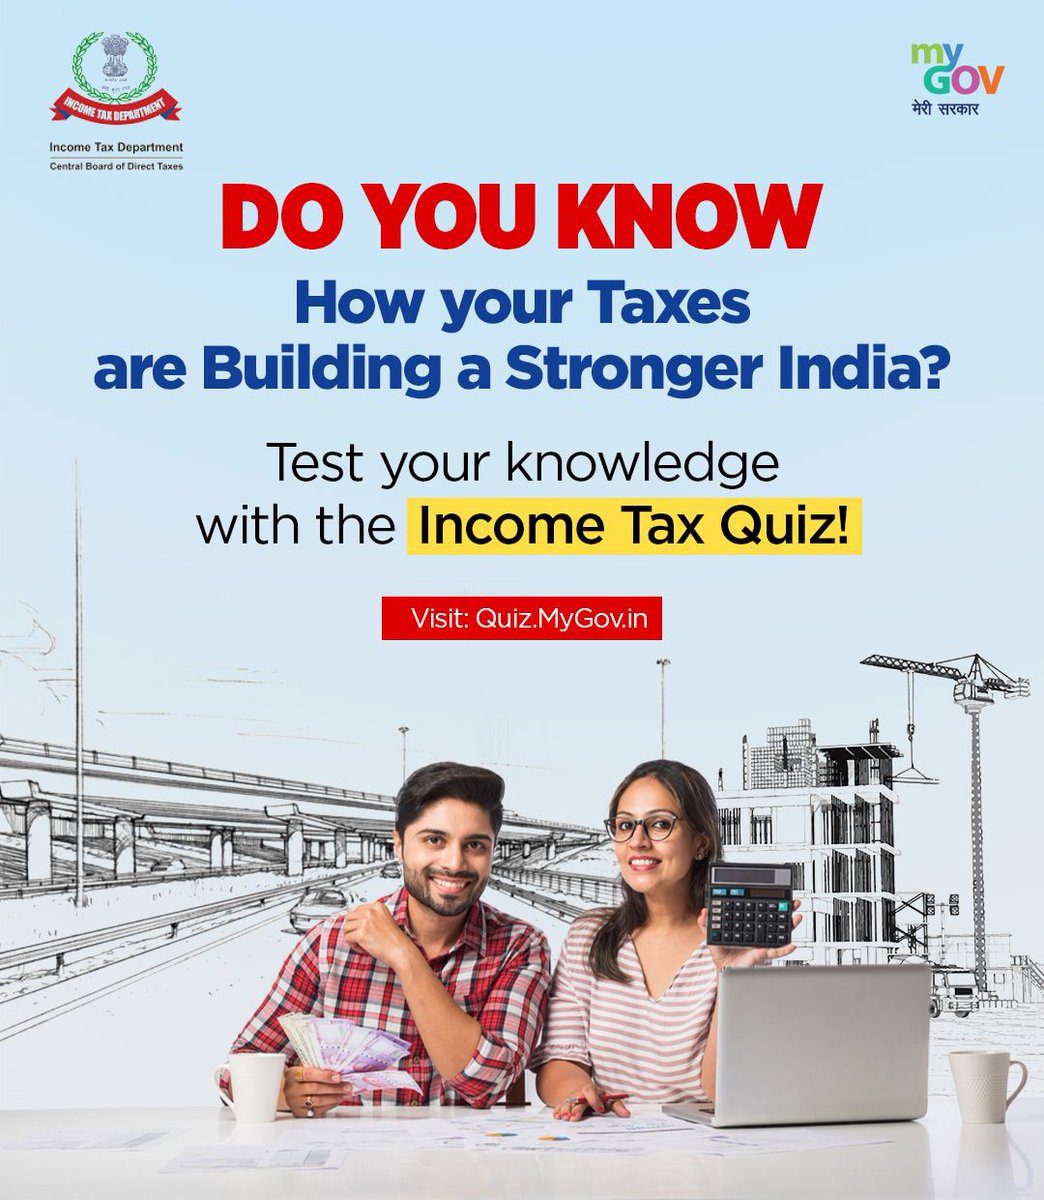 Calling all citizens to participate in the Income Tax Quiz on #MyGov! Elevate your tax know-how and join a community eager to learn. Let's make tax education accessible to everyone. Visit: quiz.mygov.in/quiz/income-ta… #NewIndia #IT @IncomeTaxIndia